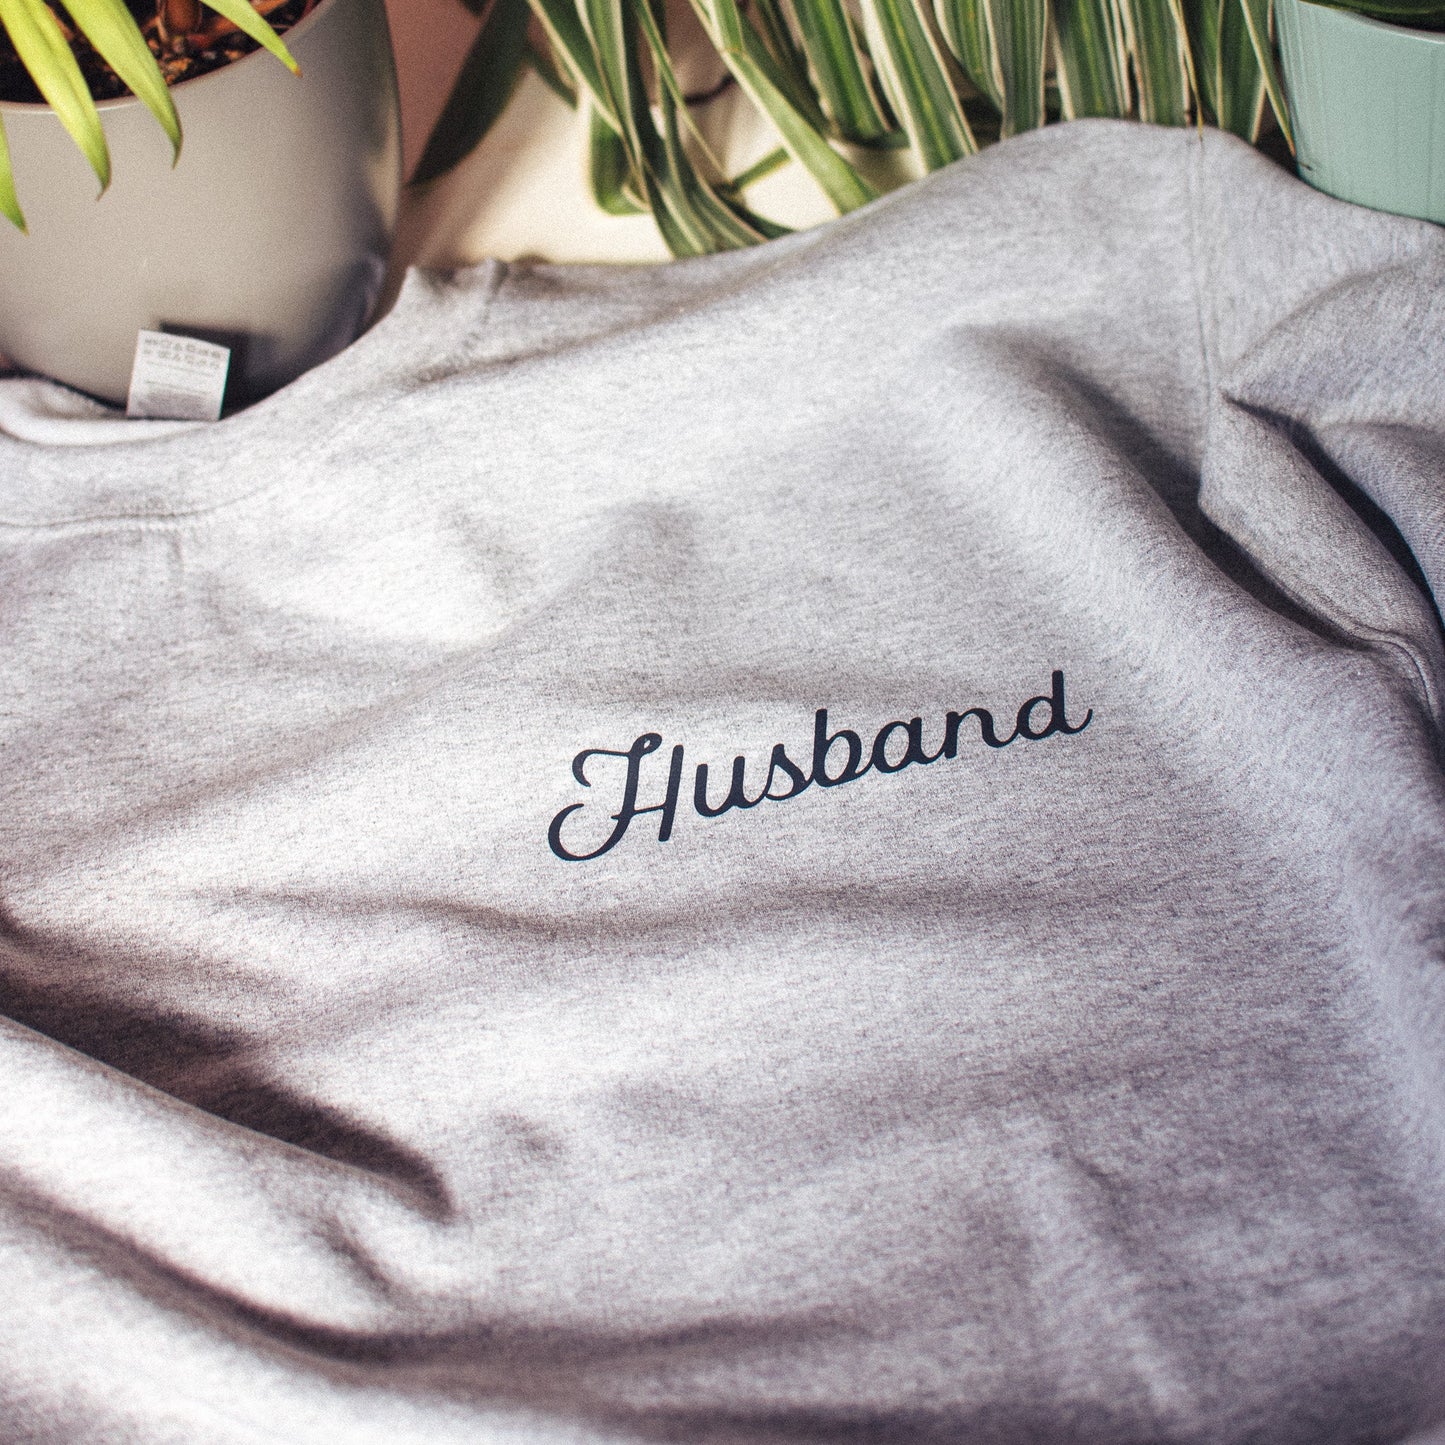 Personalised "Mr" Jumper with Wedding Date - F&B Crafts - Fox & Co Apparel